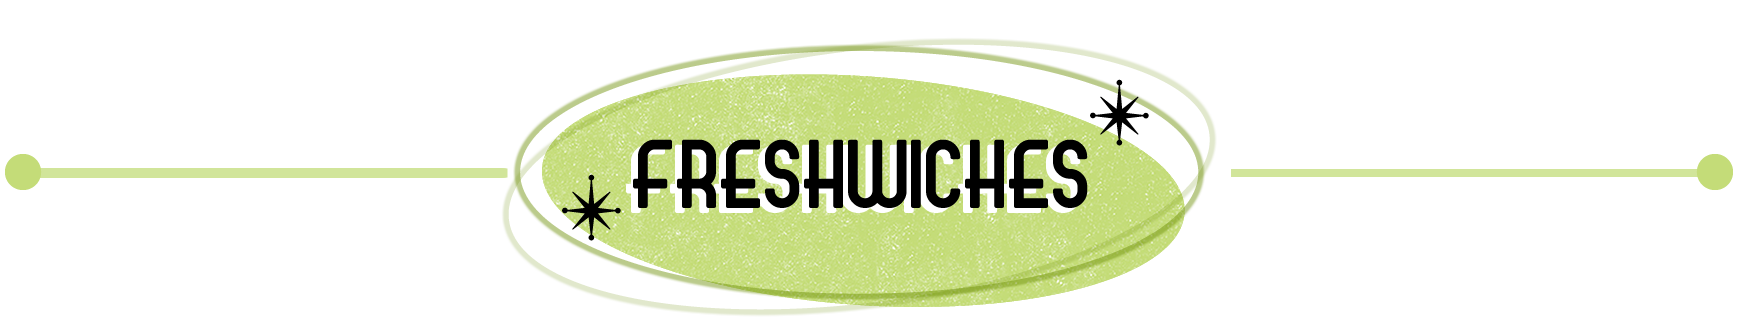 title text Freshwiches spring rolls